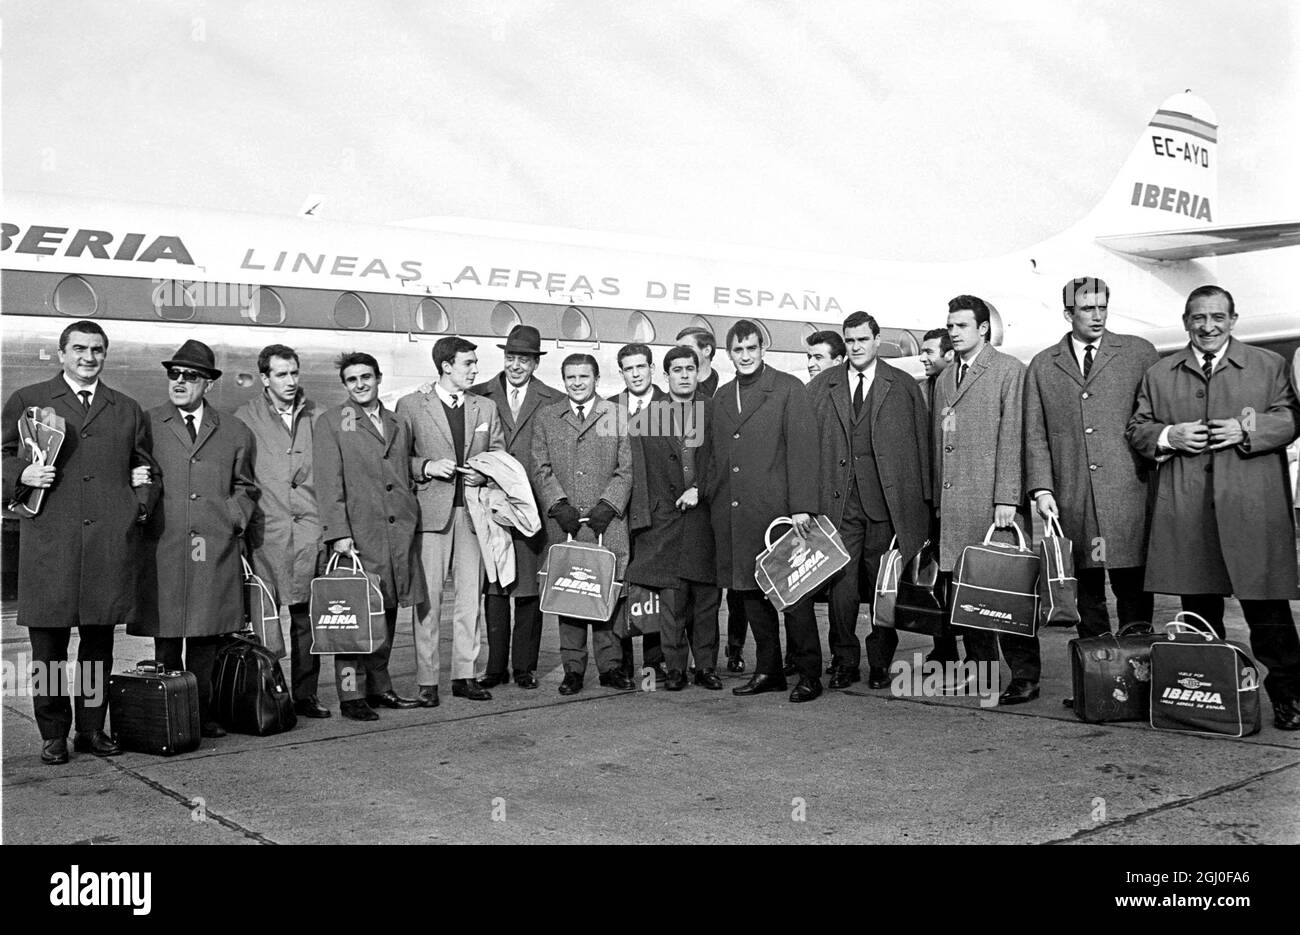 Members of the Real Madrid football team are seen arriving at London Airport for their European match with Chelsea of England. 21st November 1966 Stock Photo